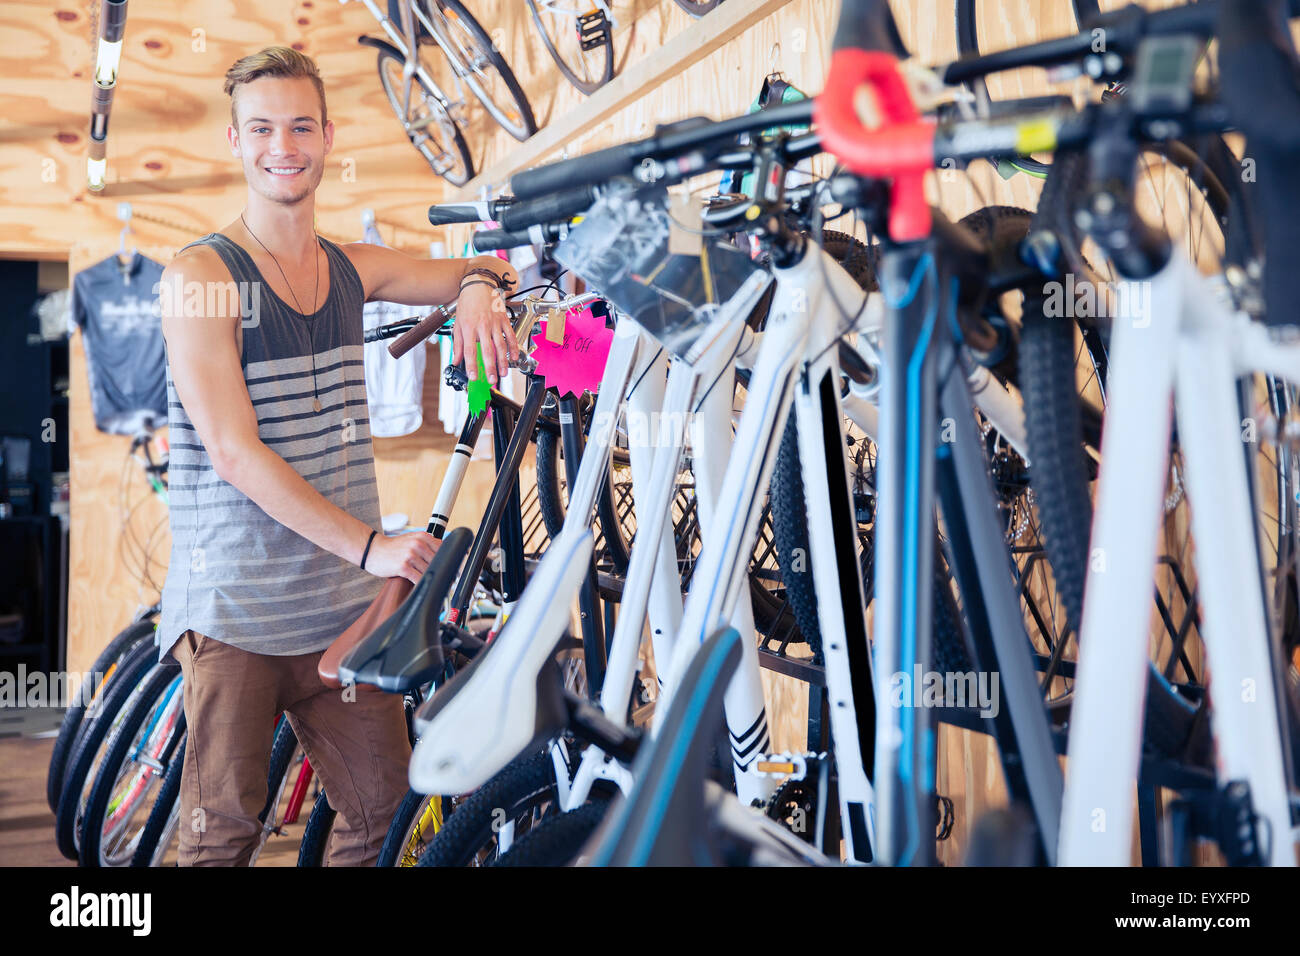 Portrait smiling young man leaning on rack in bicycle shop Stock Photo